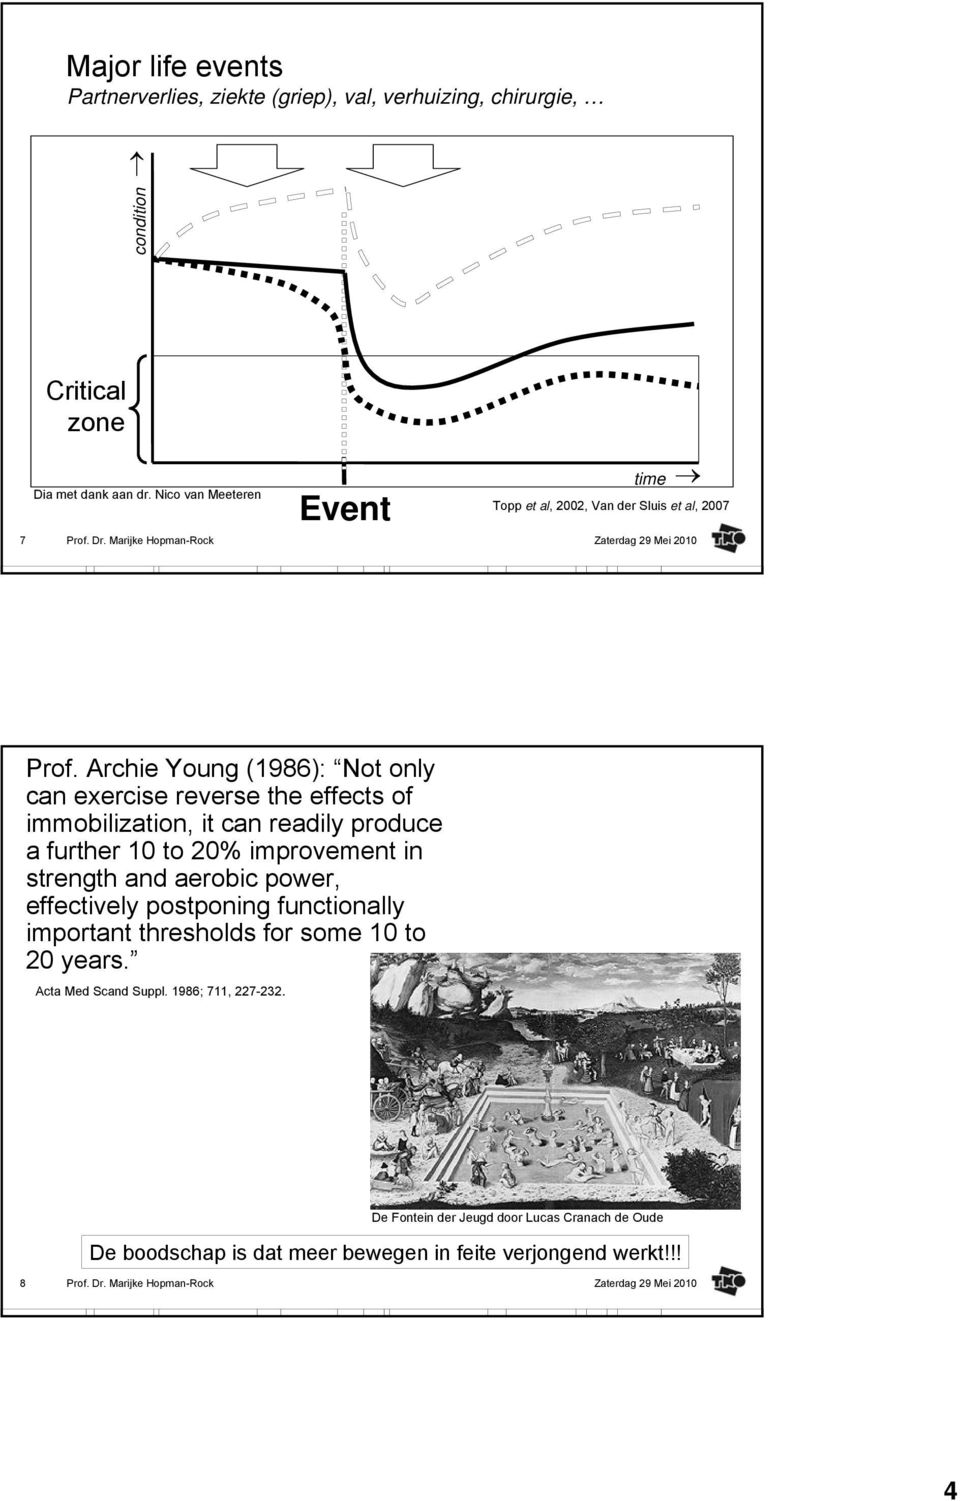 Archie Young (1986): Not only can exercise reverse the effects of immobilization, it can readily produce a further 10 to 20% improvement in strength and